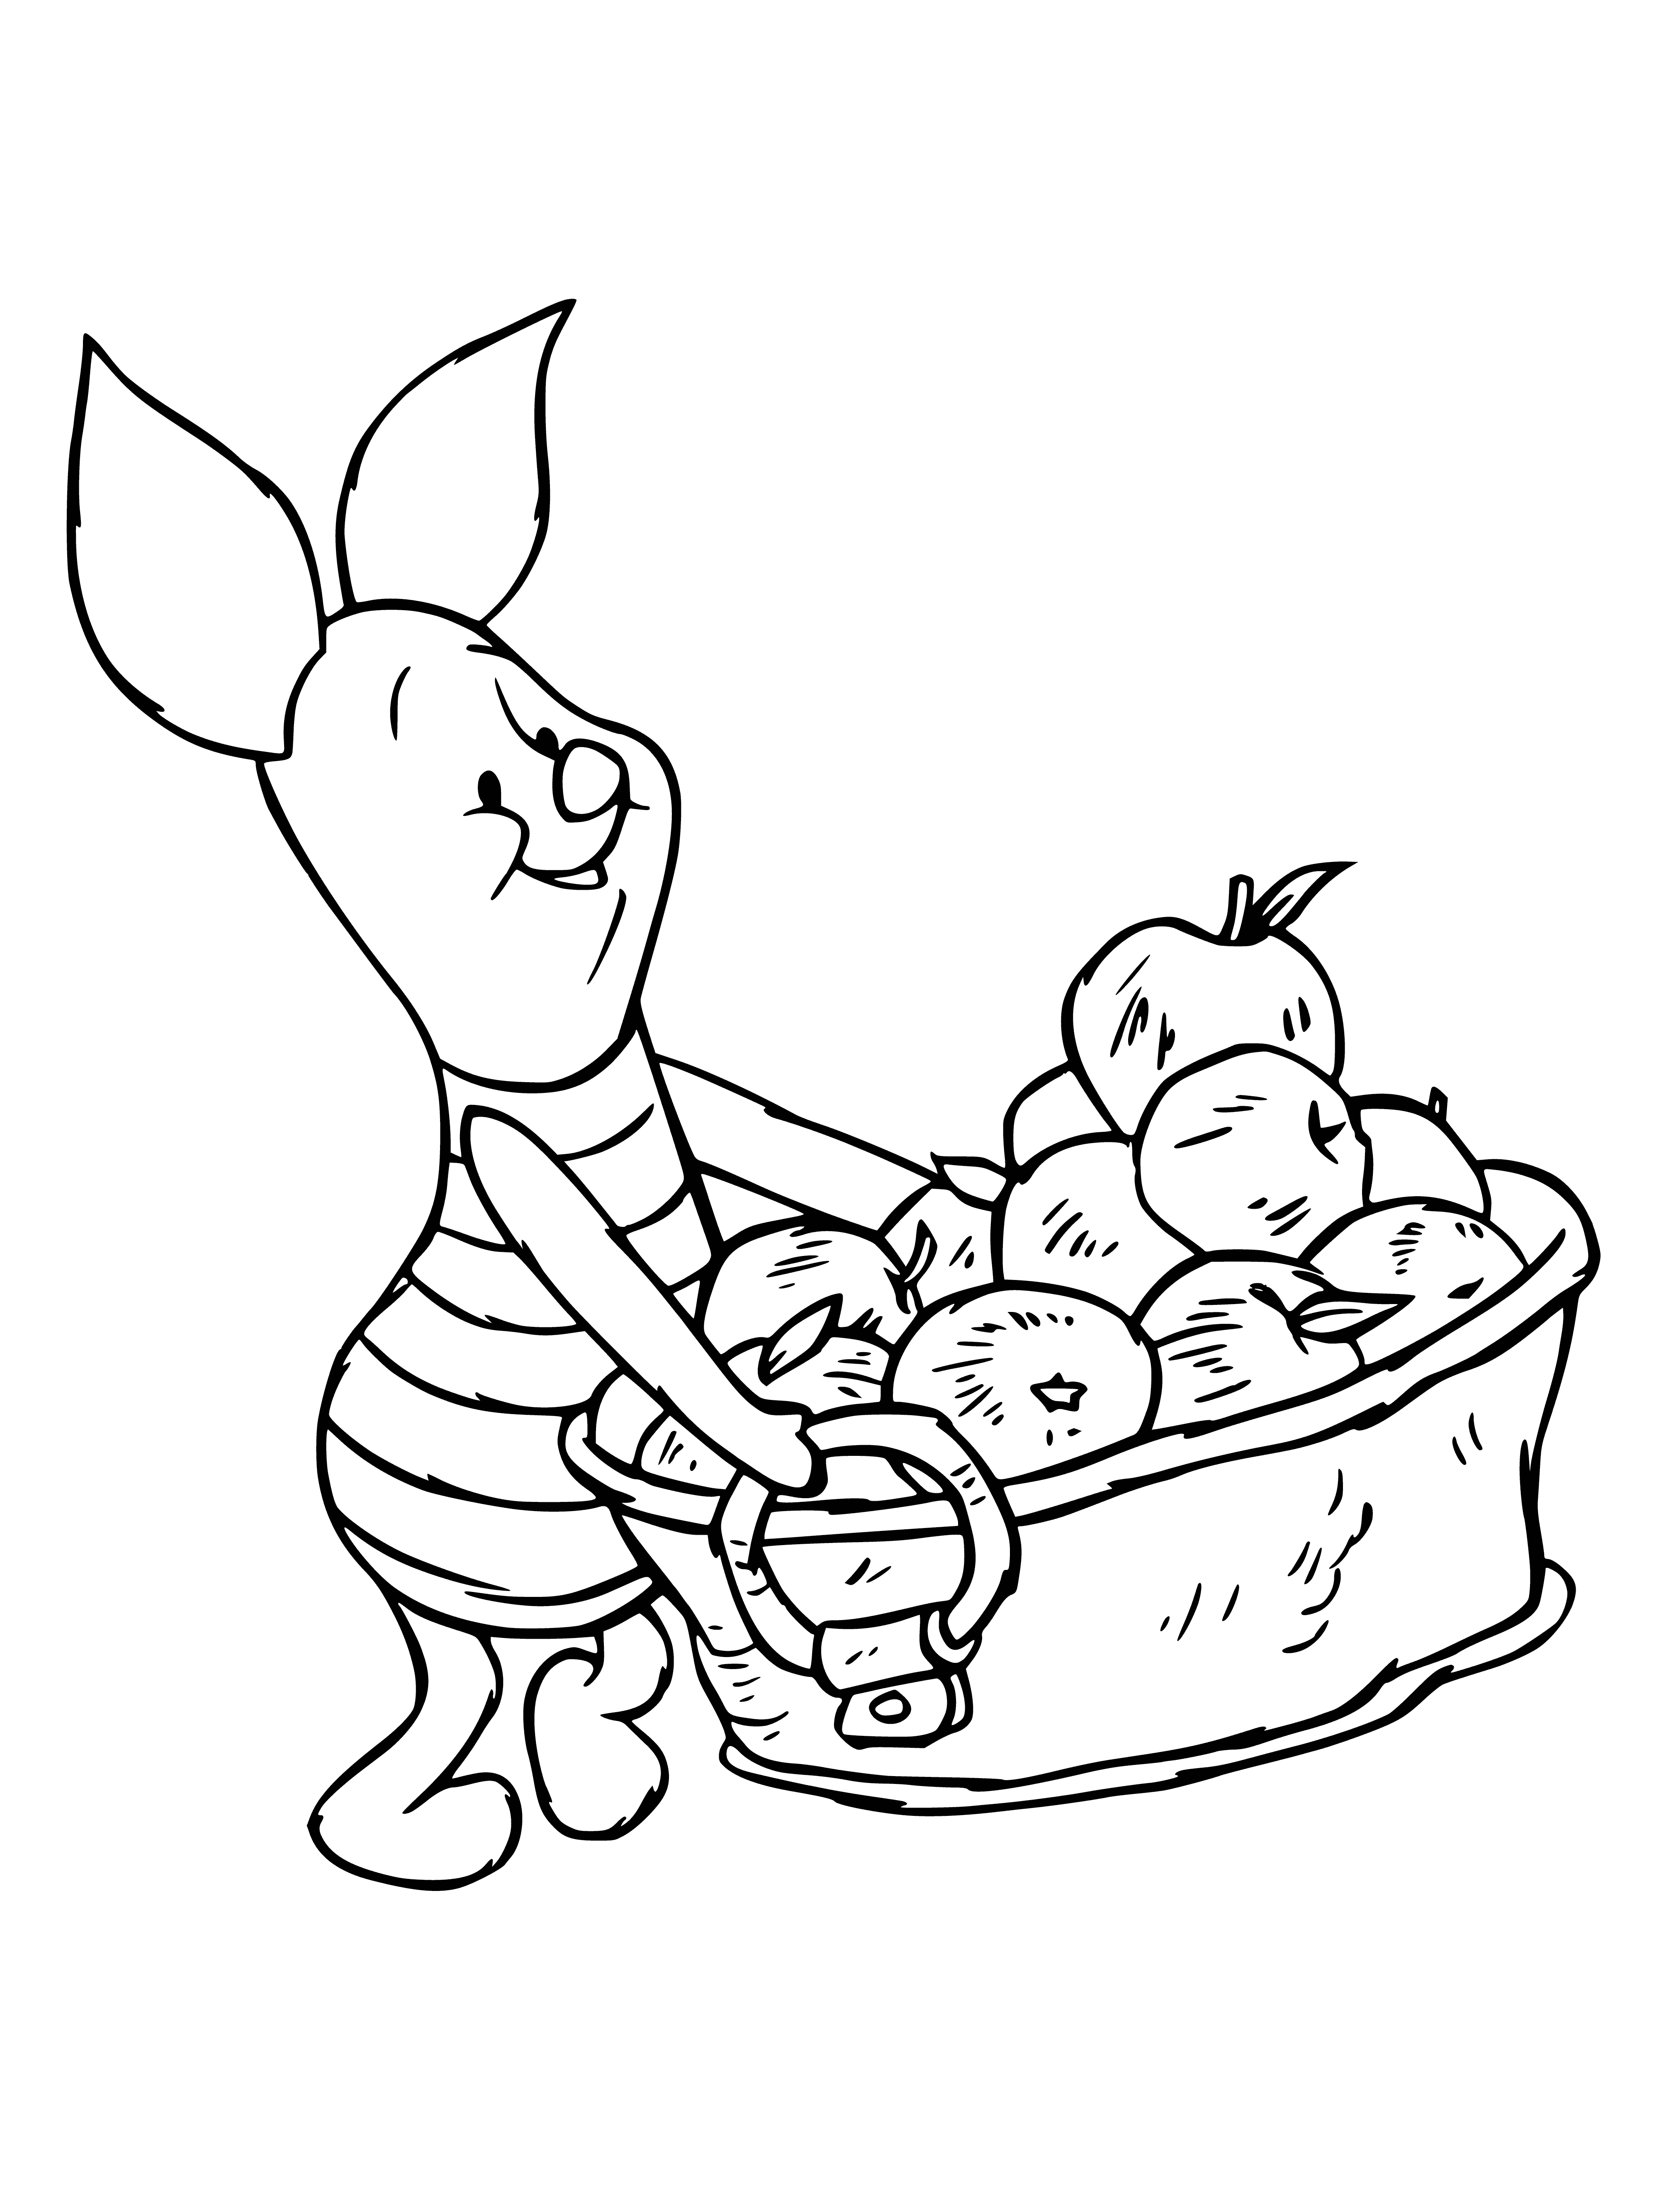 coloring page: A pig picks apples from a tree in a red shirt, surrounded by leaves.